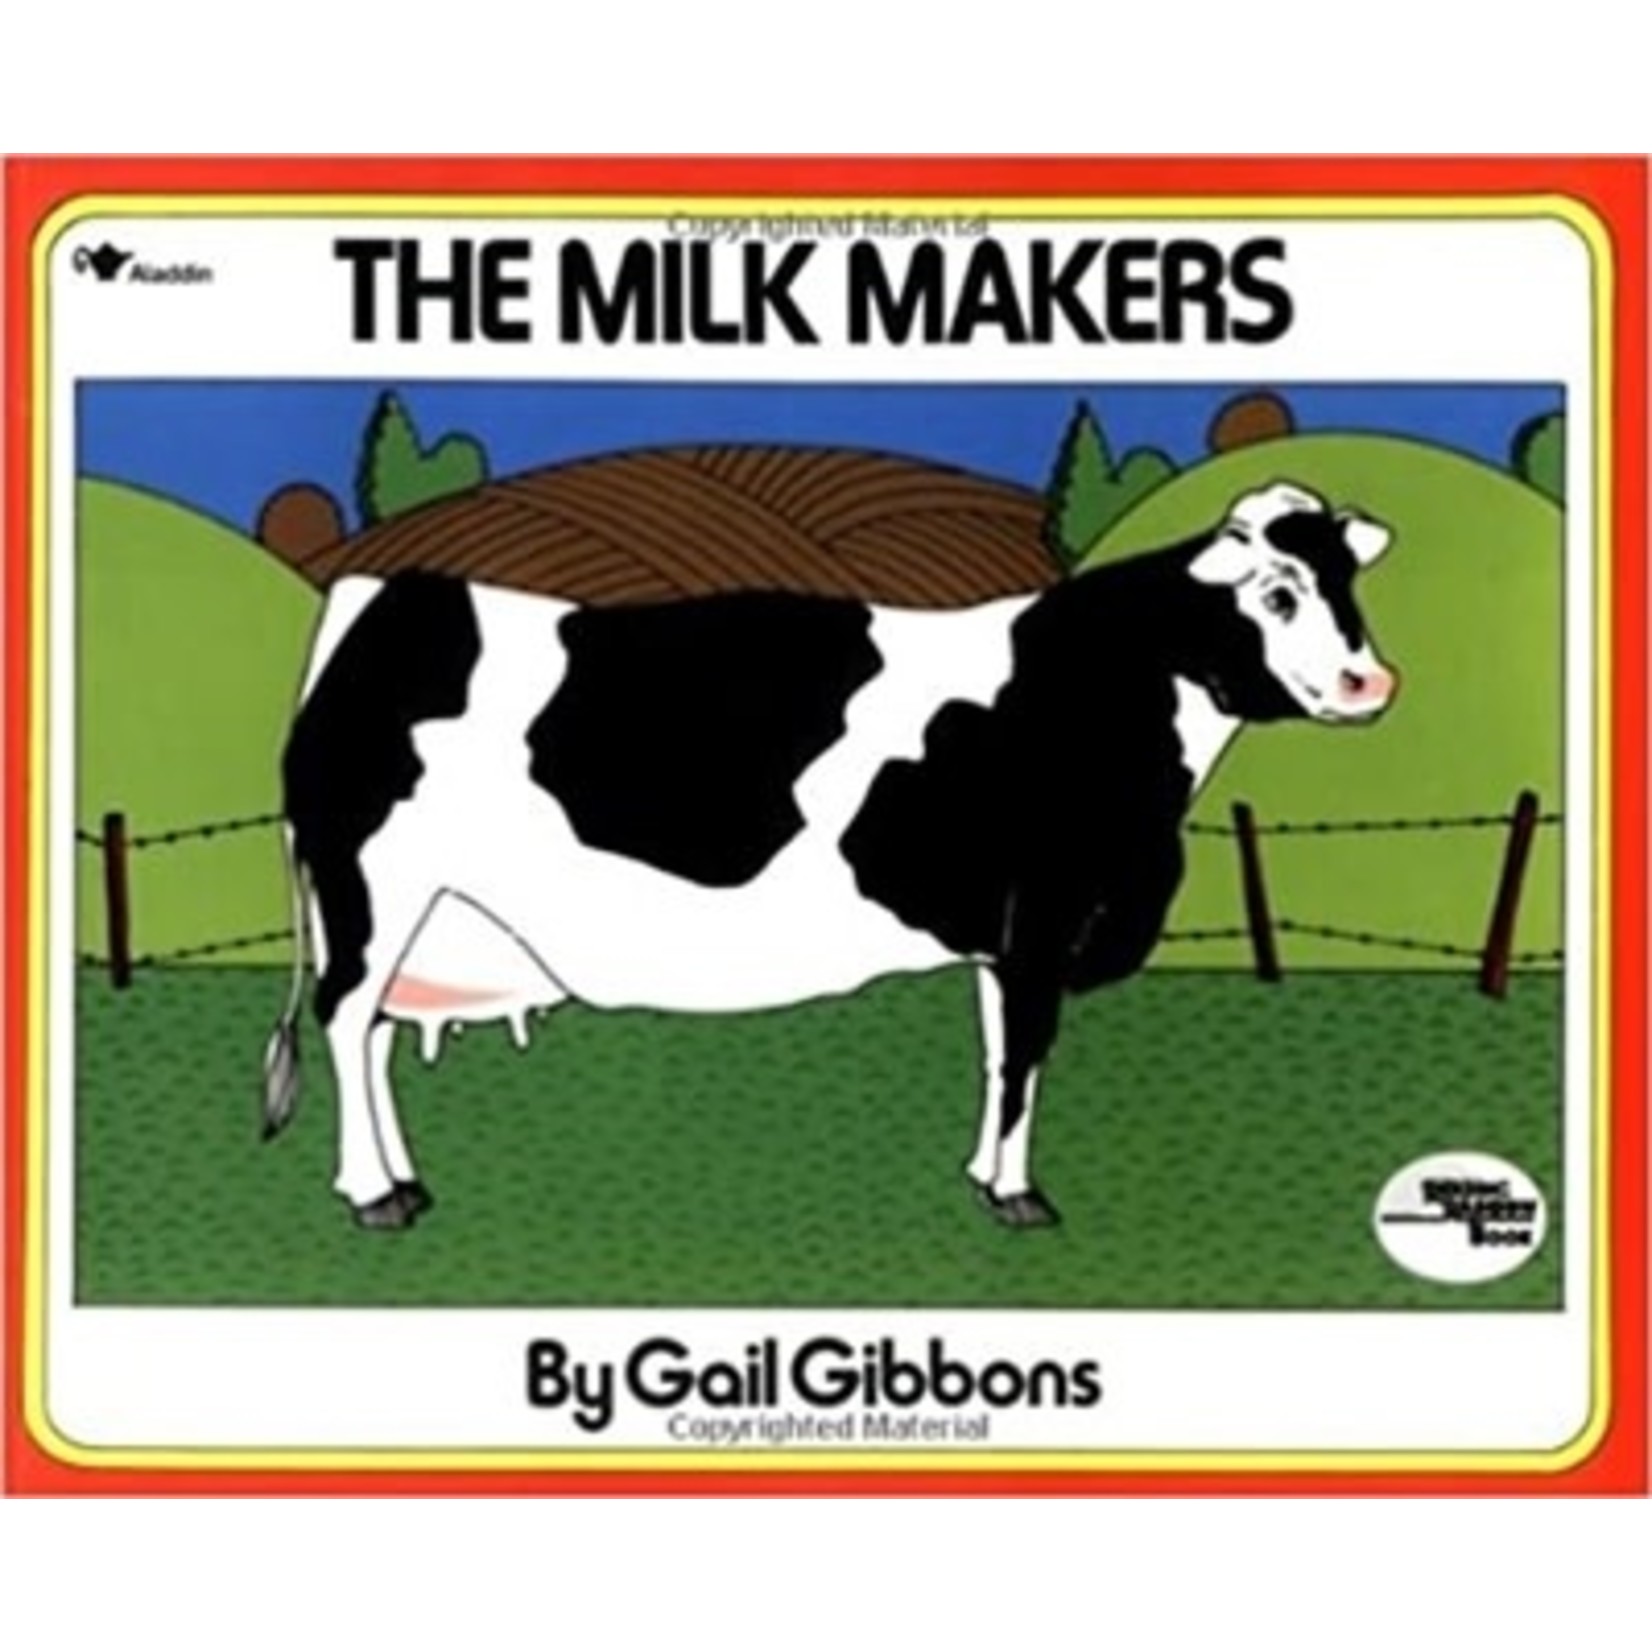 Milk Makers by Gail Gibbons